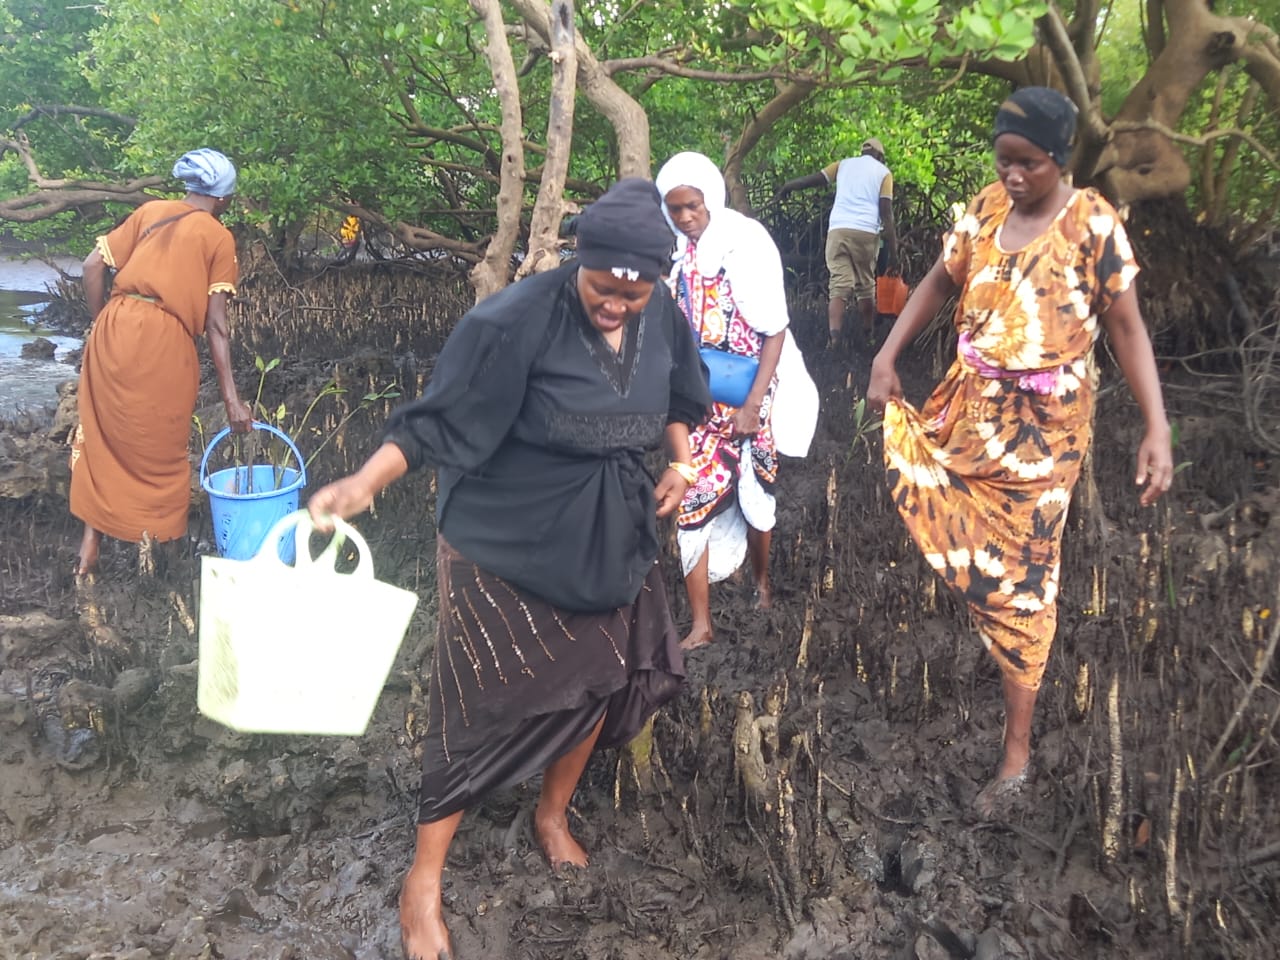 Women-led mangrove restoration project in Kwale transforms environment ...